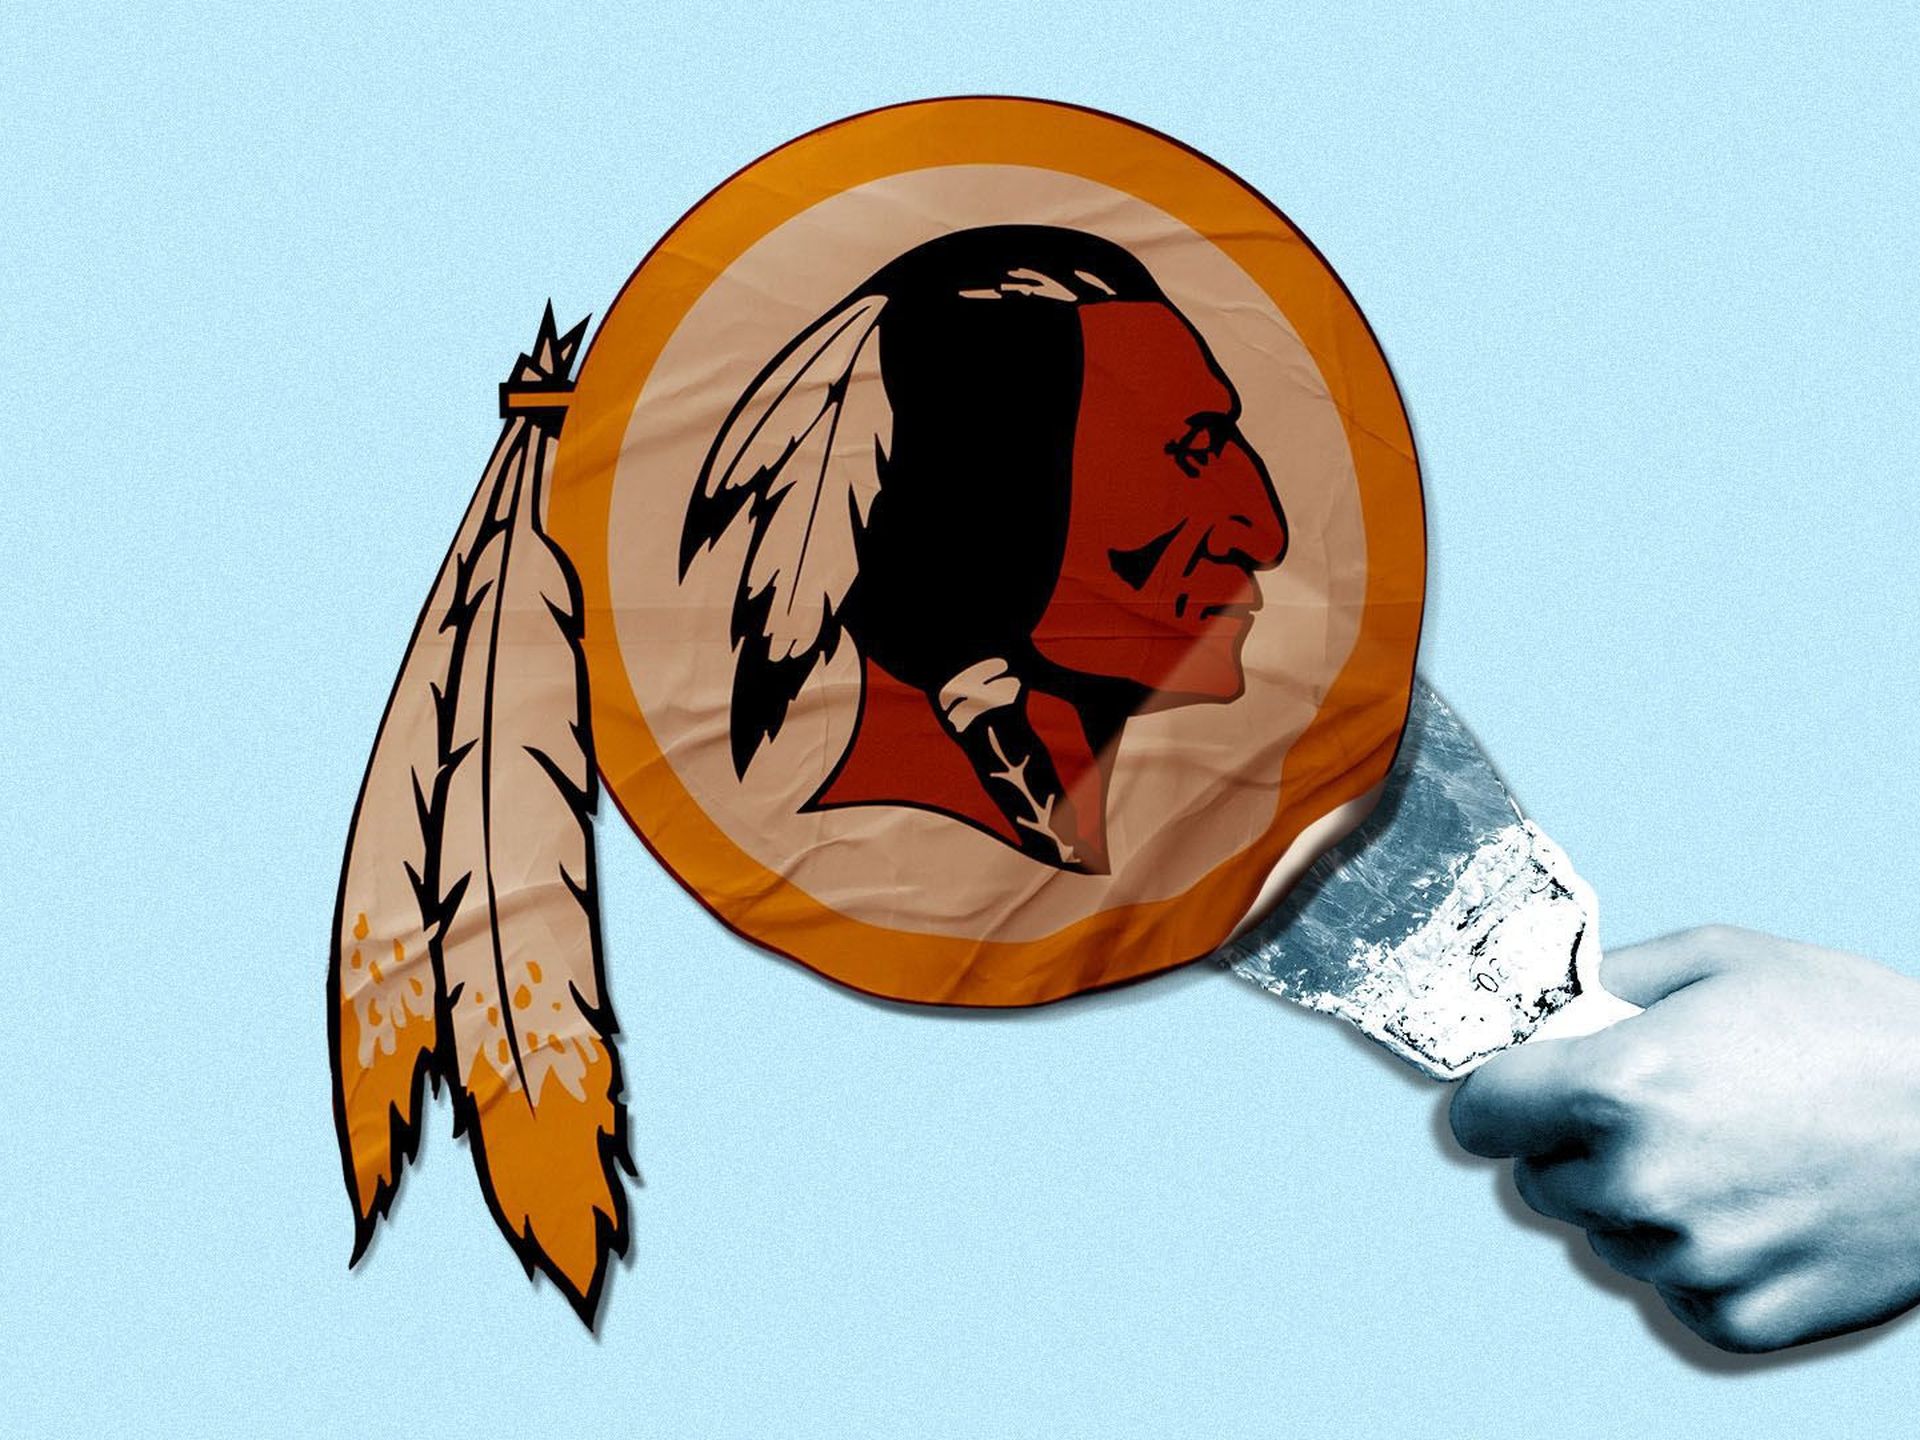 Washington officially moving on from Redskins name and logo